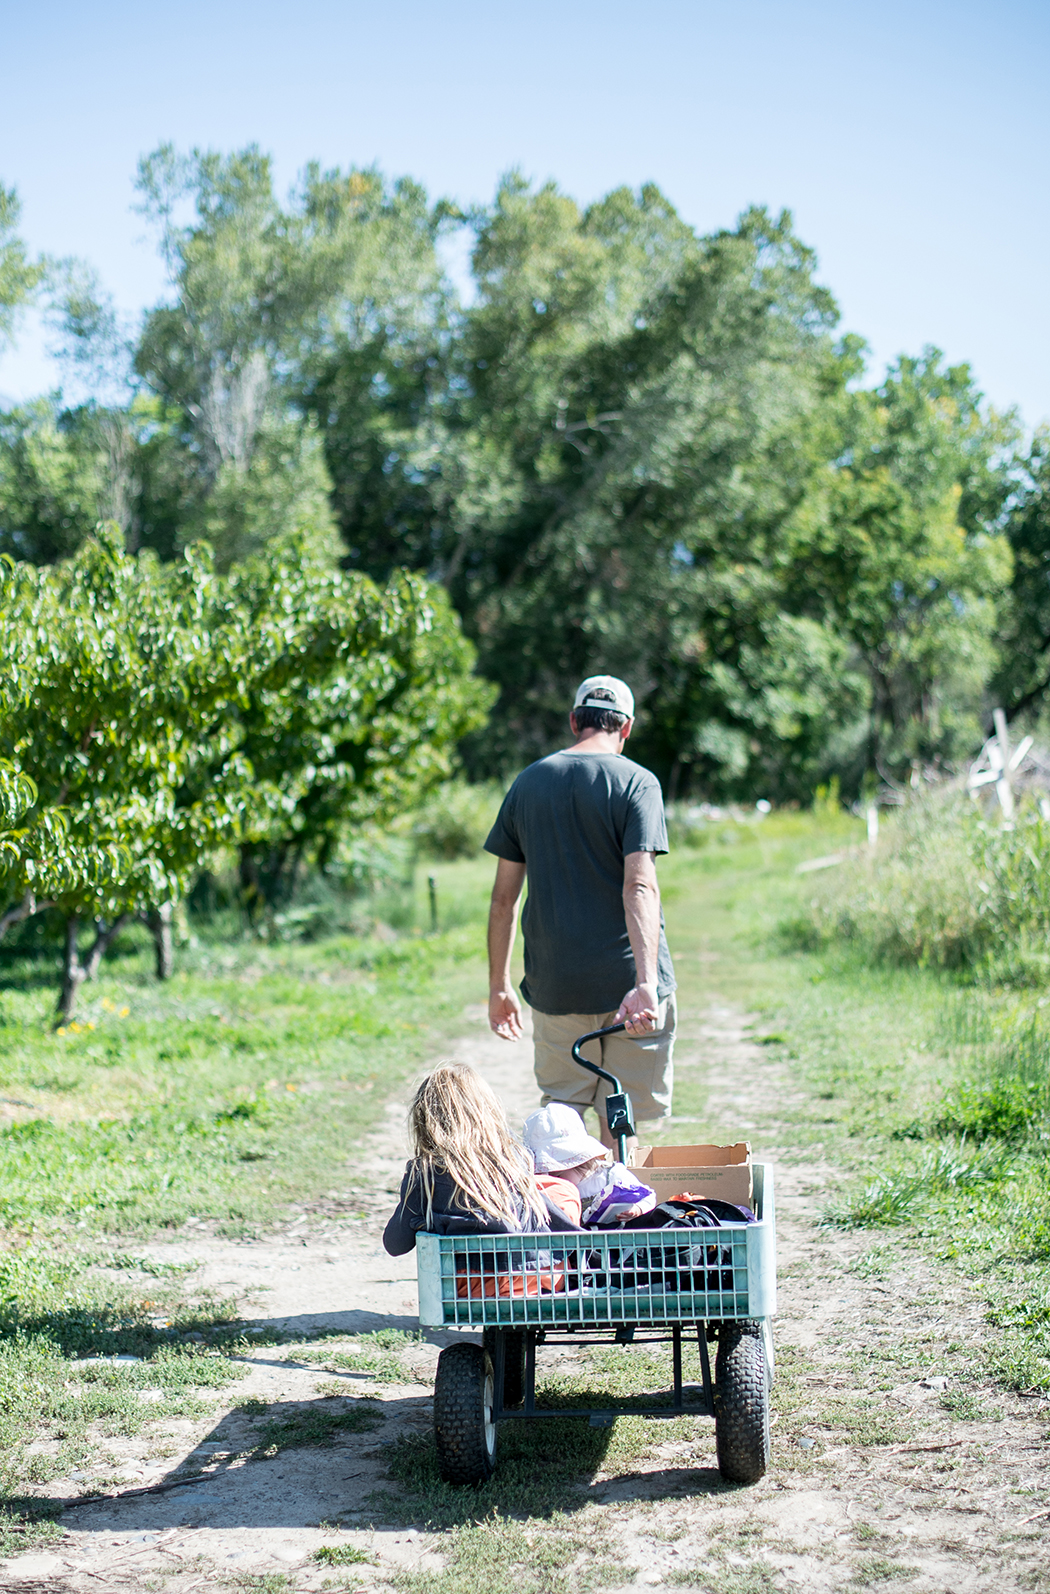 peach picking in paonia, colorado